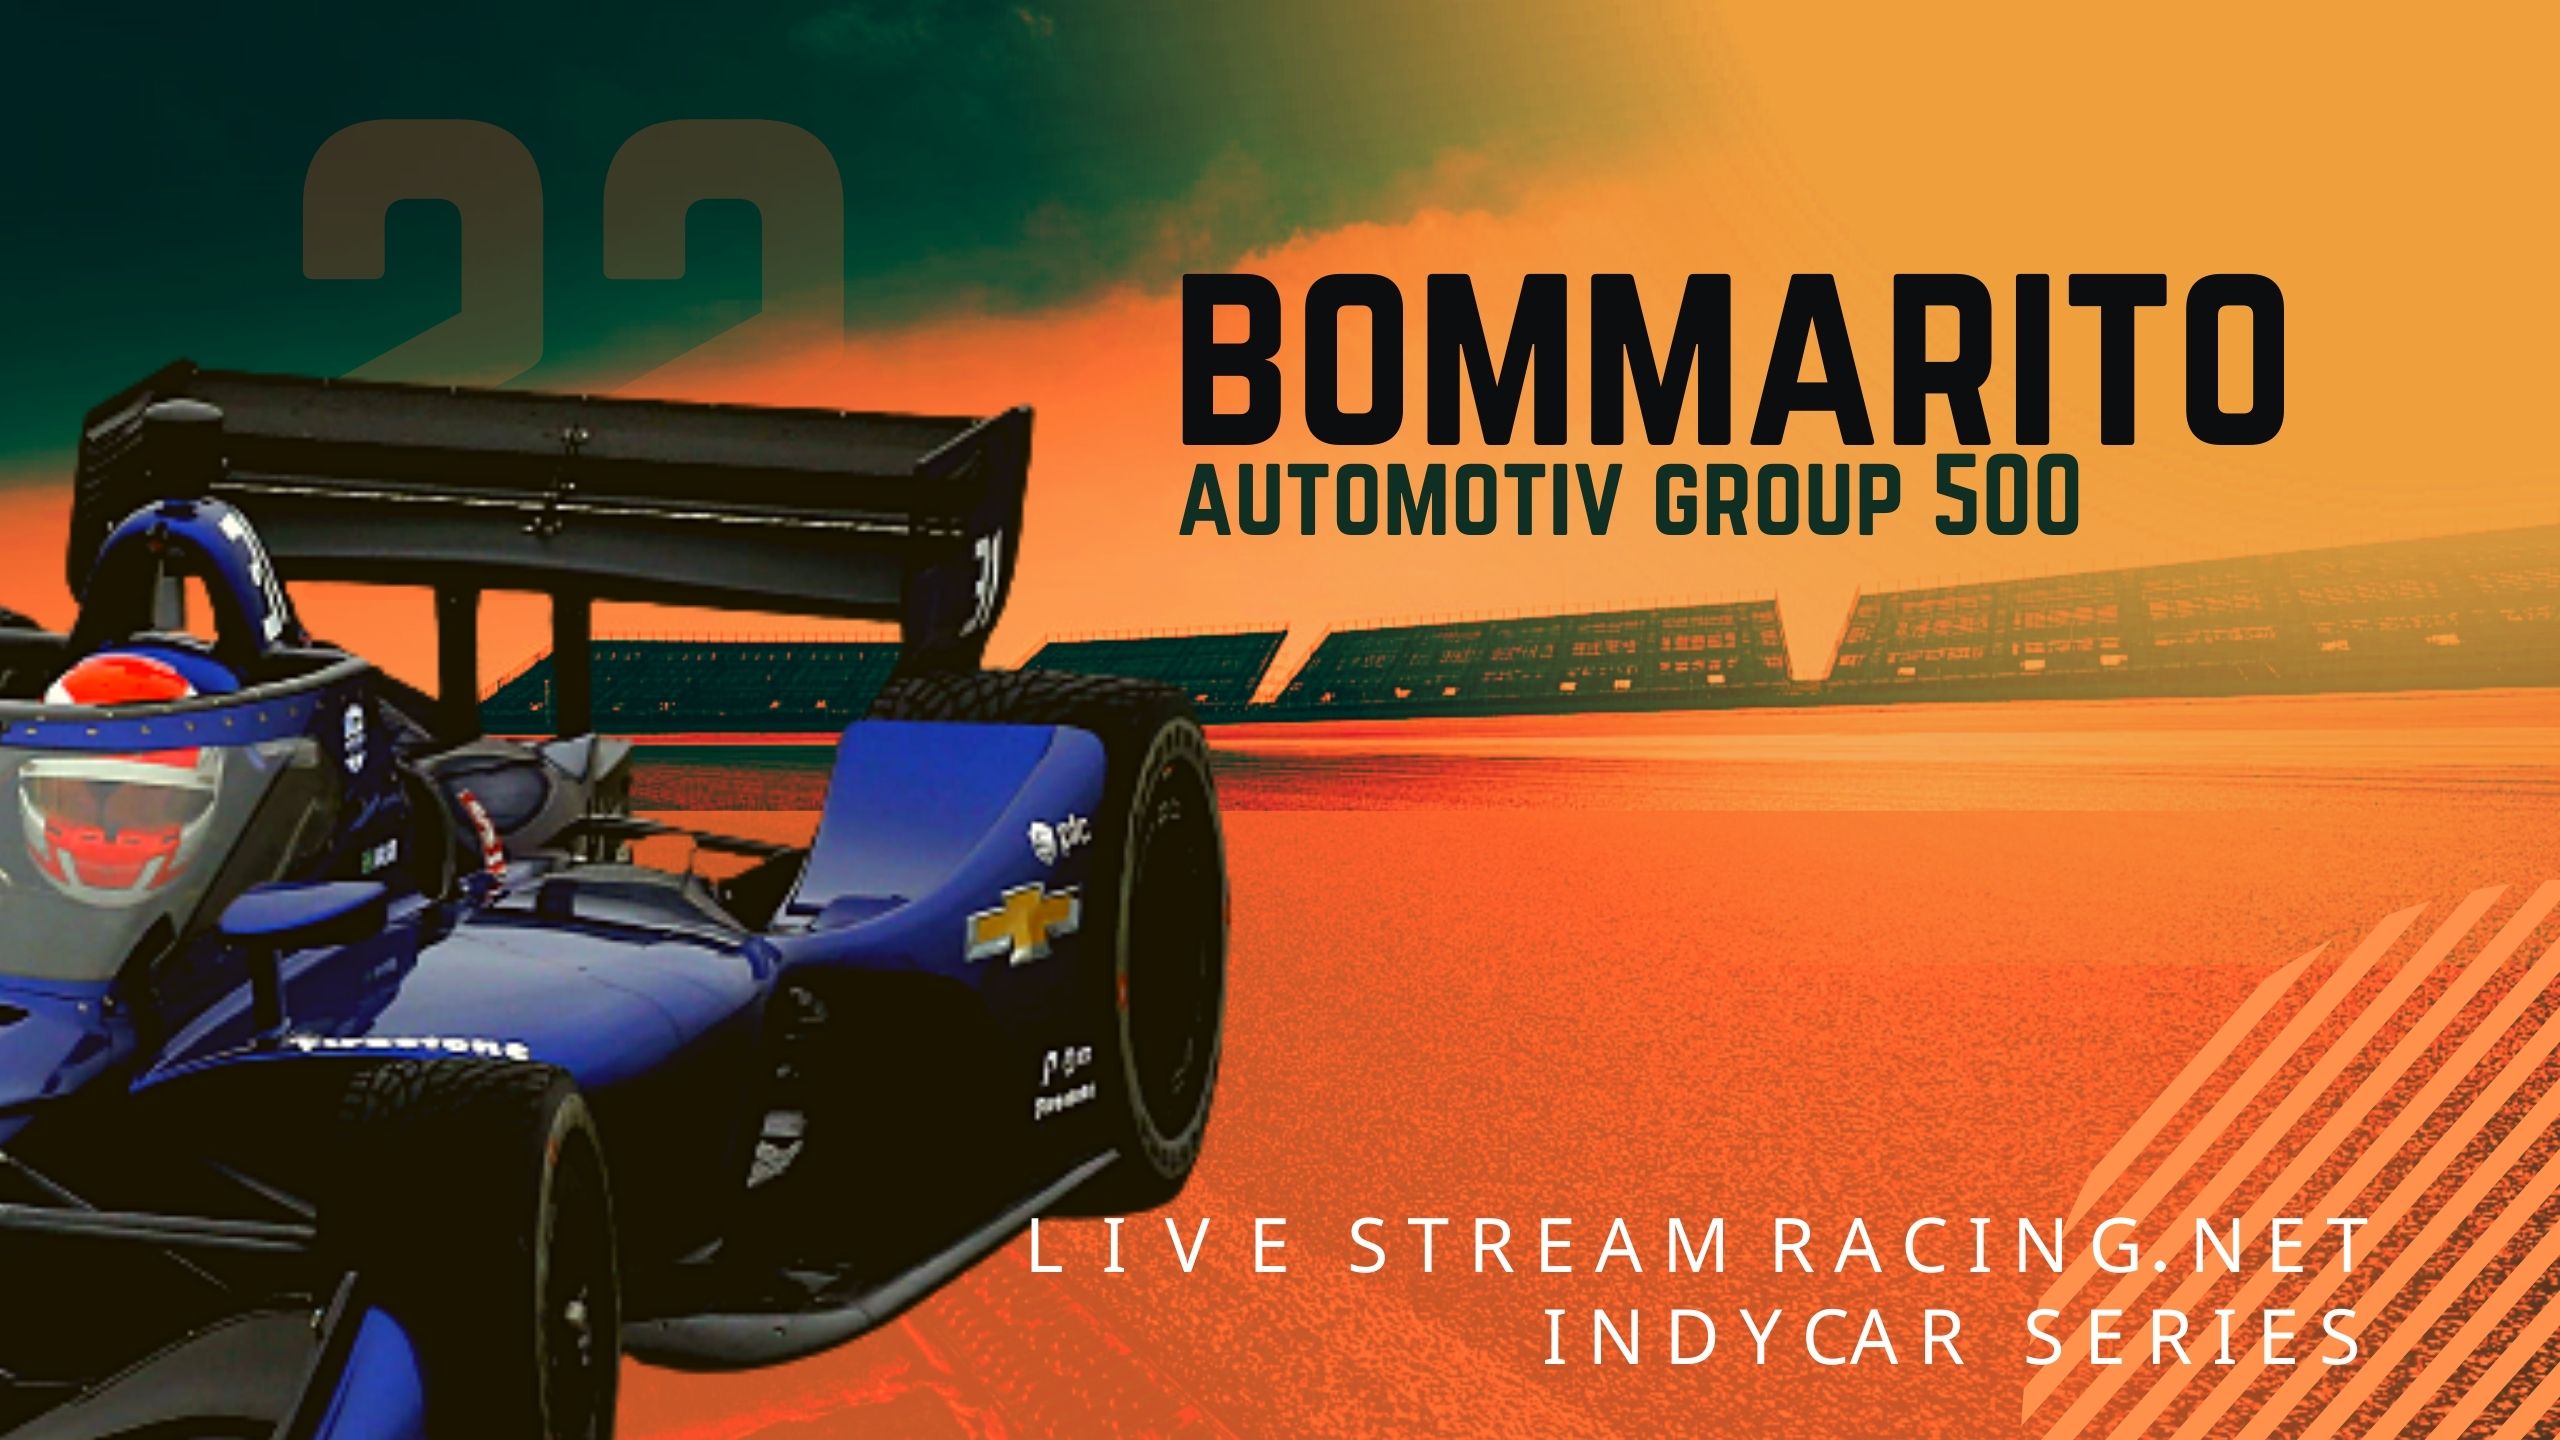 Bommarito Automotive Group 500 Indycar 2022 Live Stream | Race Replay